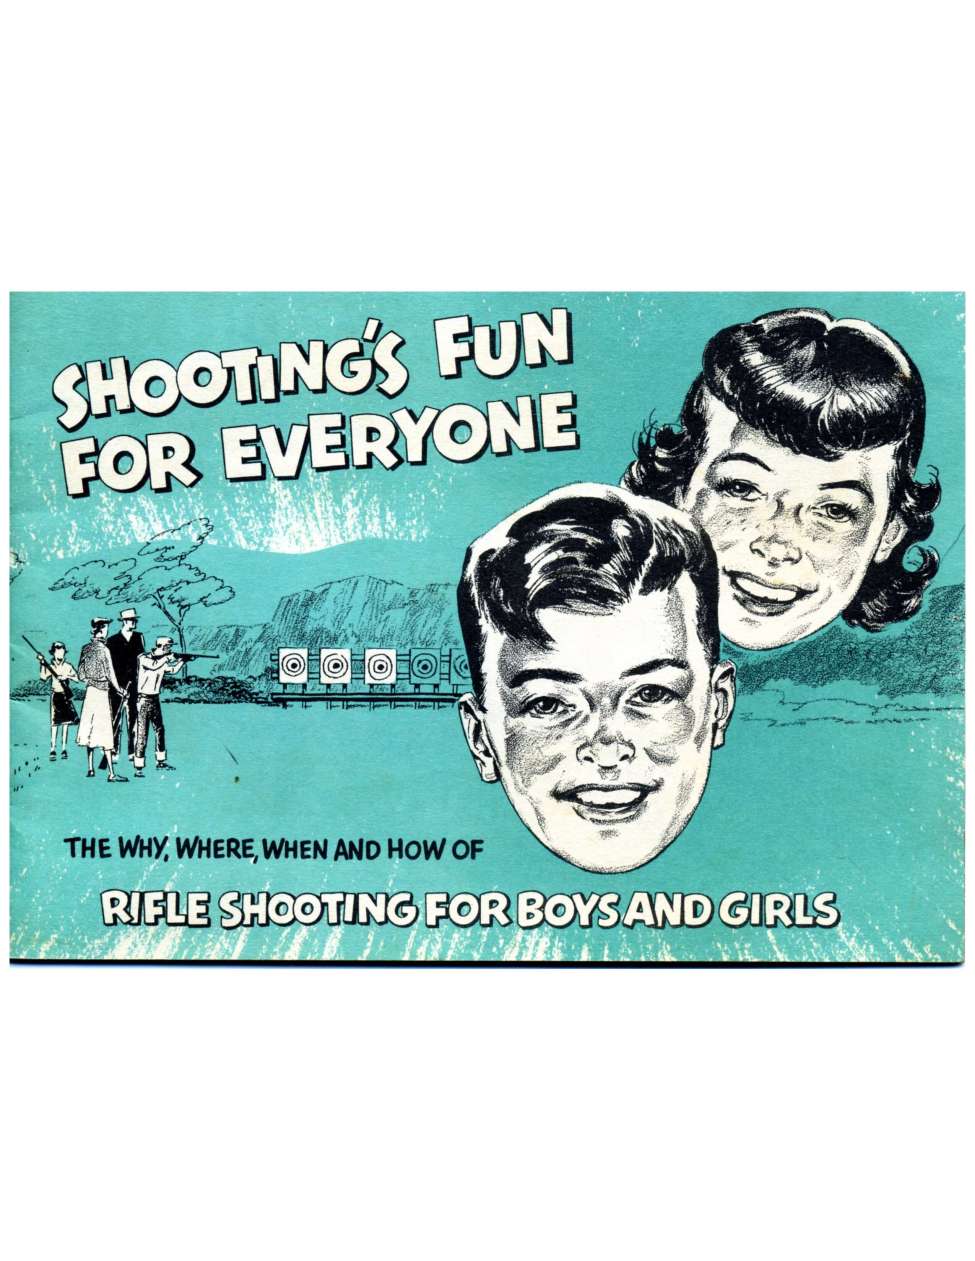 Comic Book Cover For Shooting's Fun For Everyone